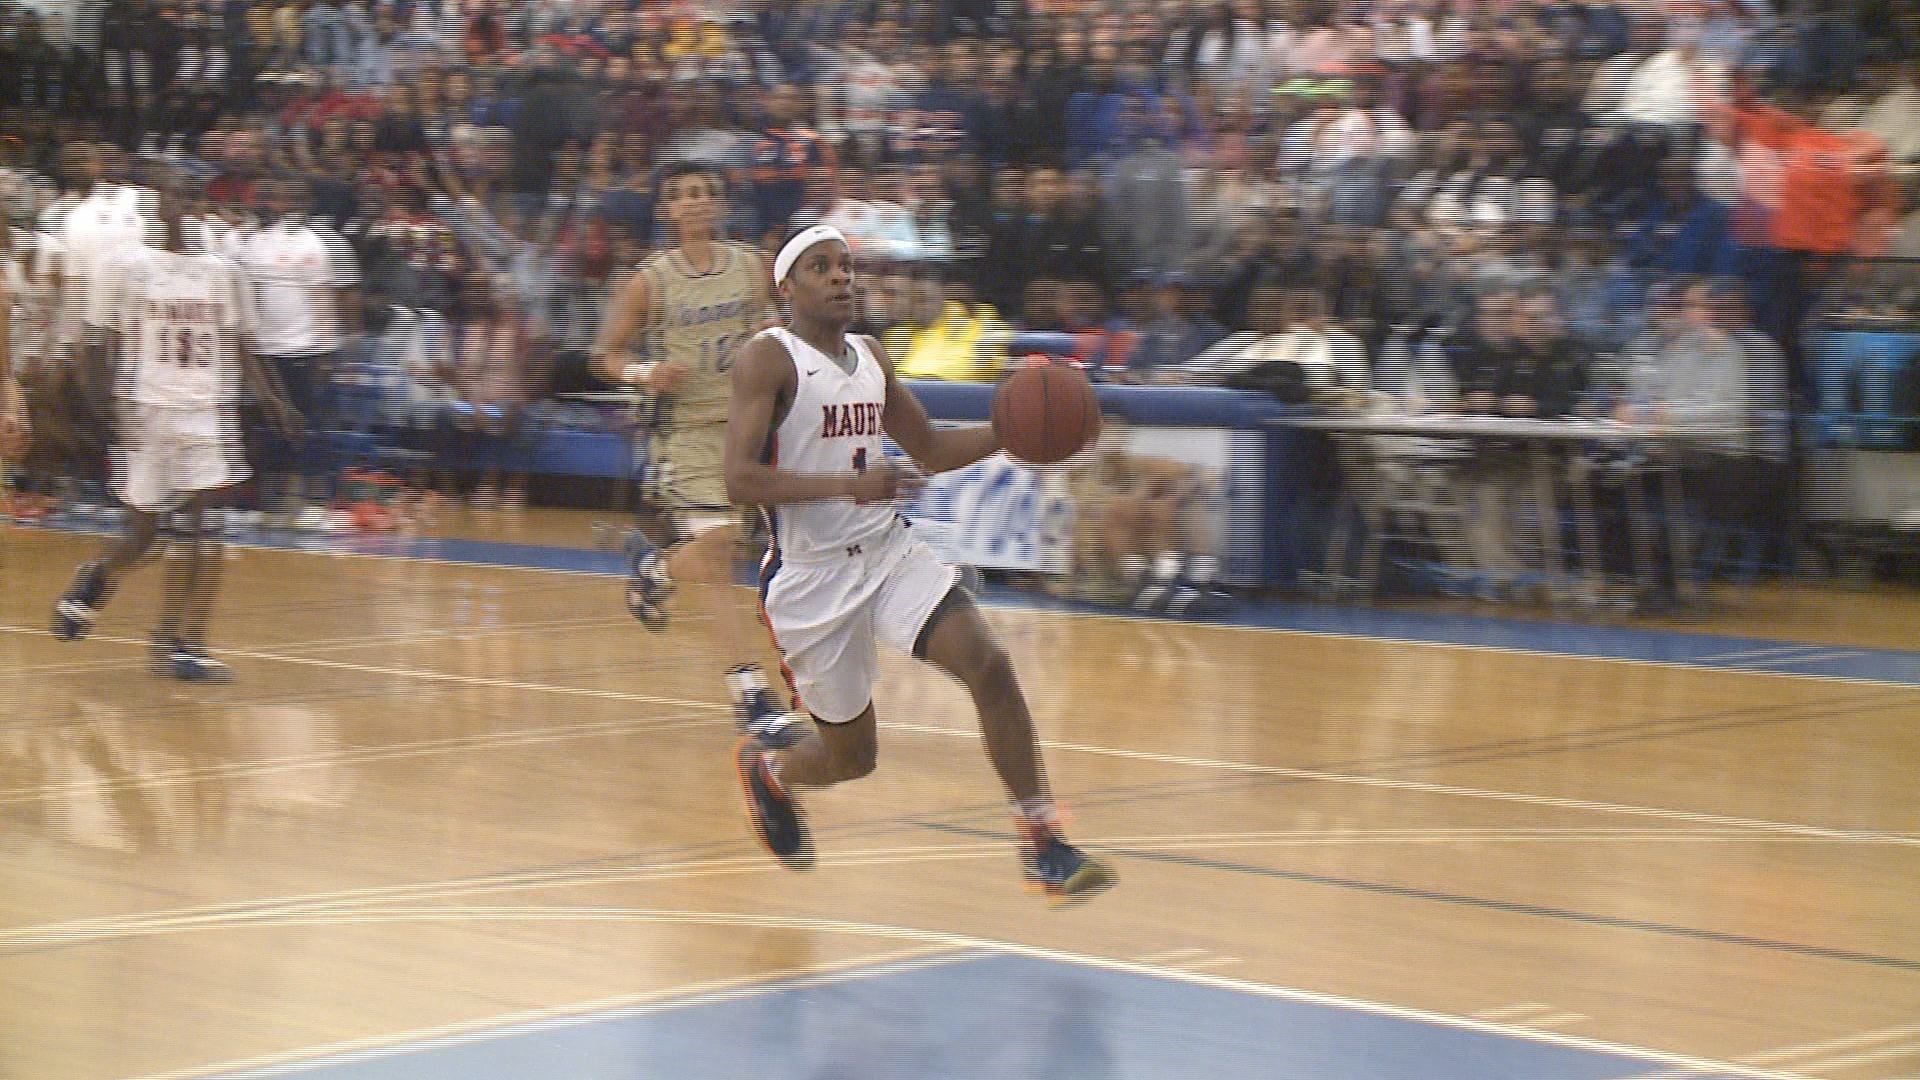 Check out the double OT win for Landstown and Maury's takedown of the defending state champs.